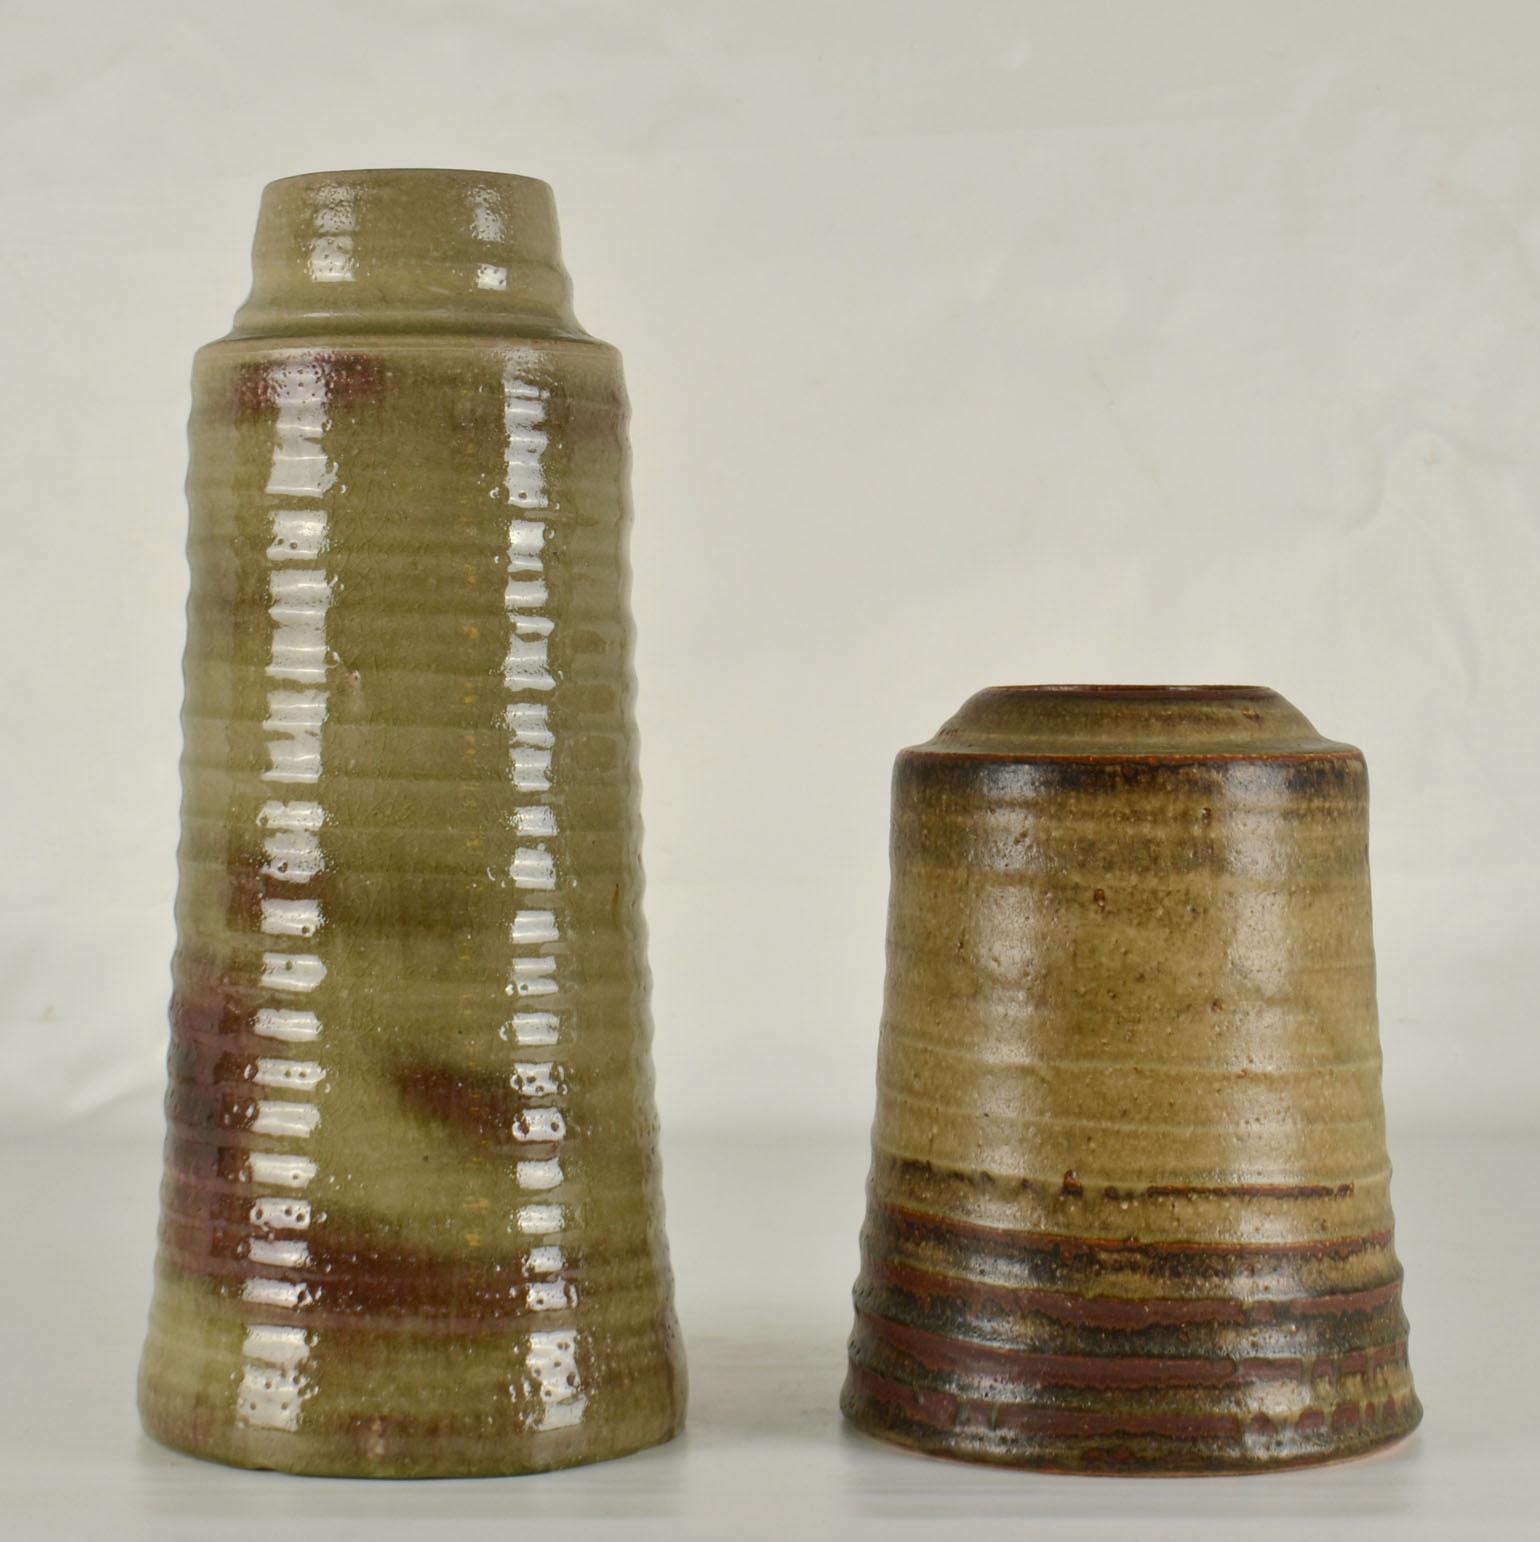 Tall Mid Century Ceramic Studio Vases in Earth Tones by Mobach For Sale 2